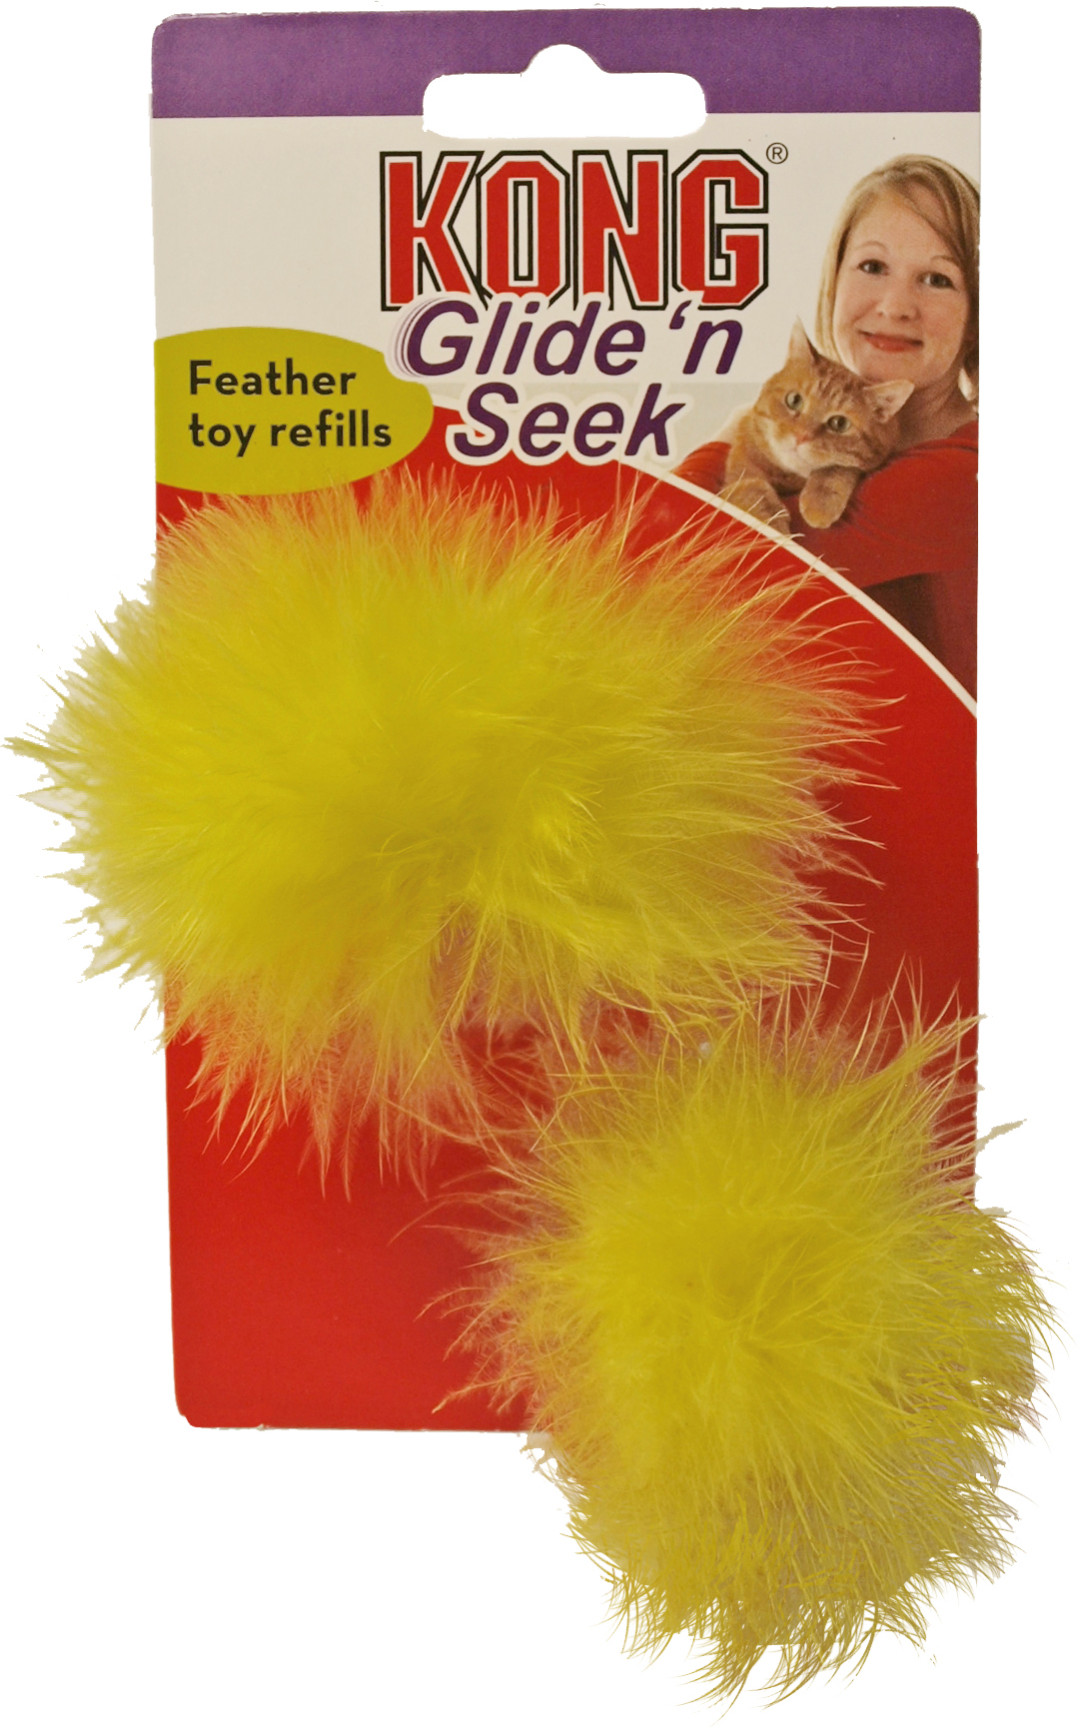 Kong Glide'n Seek feather replacement pack